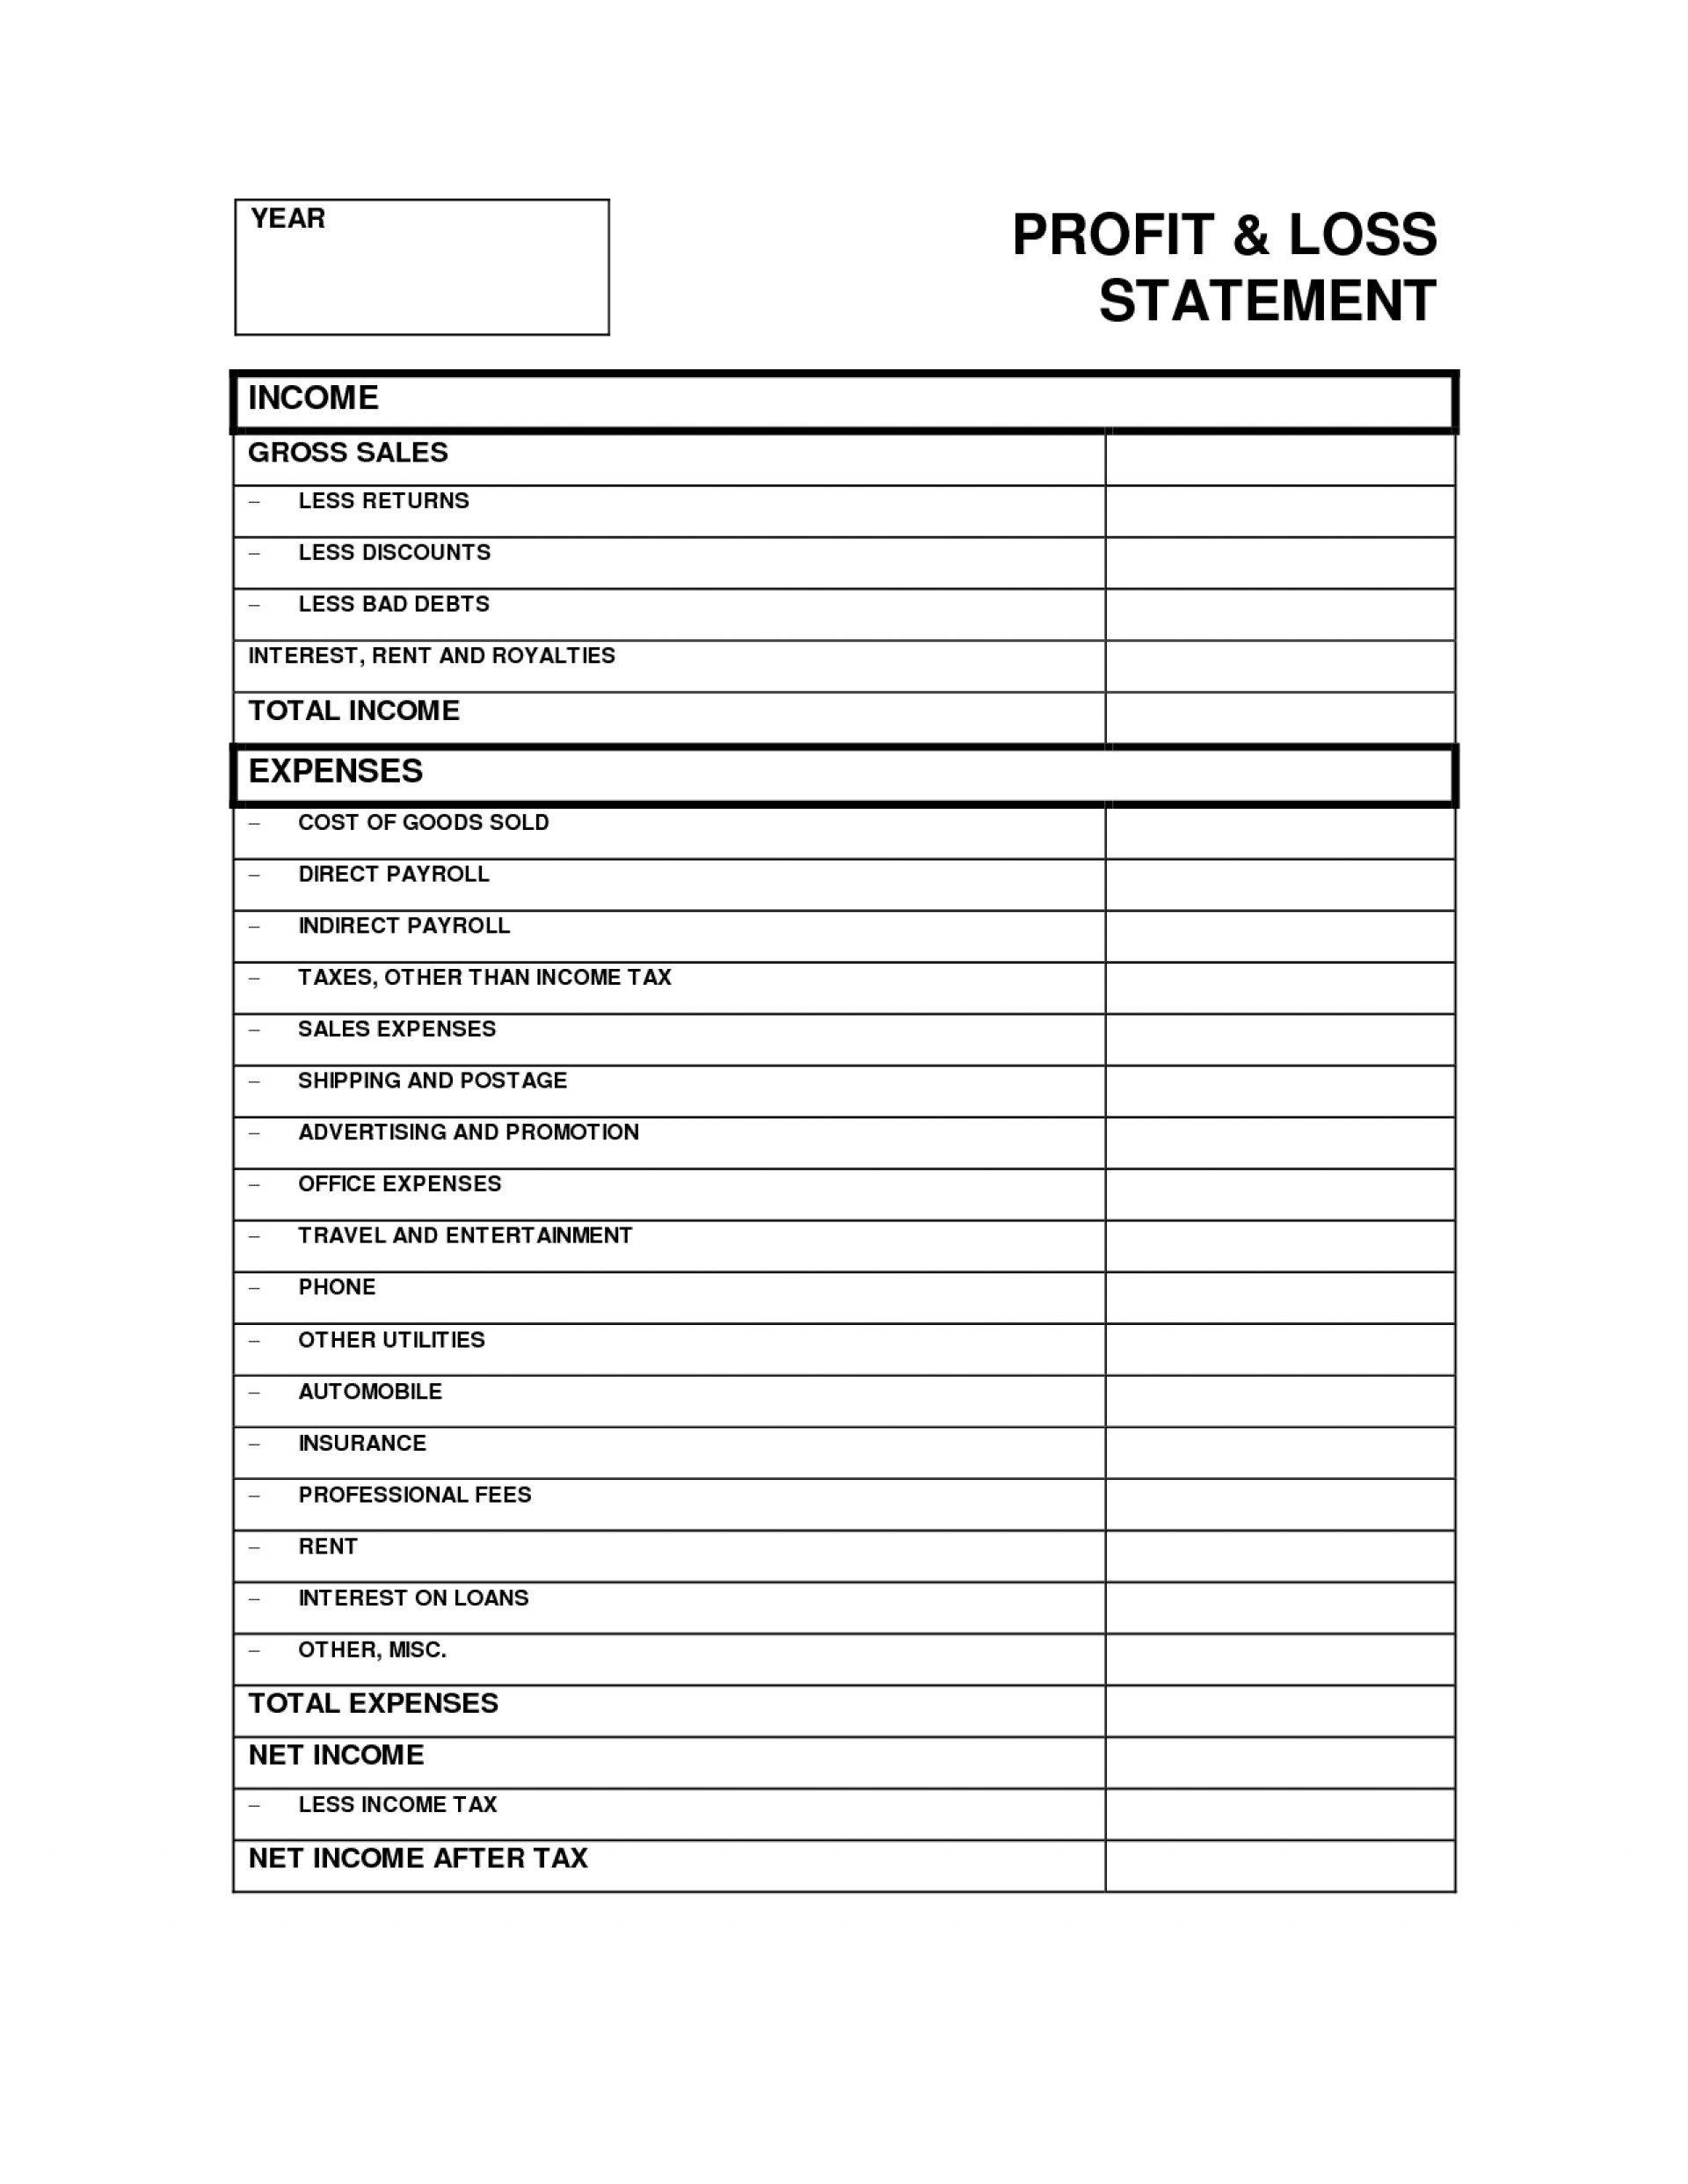 Templates For Profit And Loss Statement Template For Self Employed Excel Throughout Profit And Loss Statement Template For Self Employed Excel For Personal Use